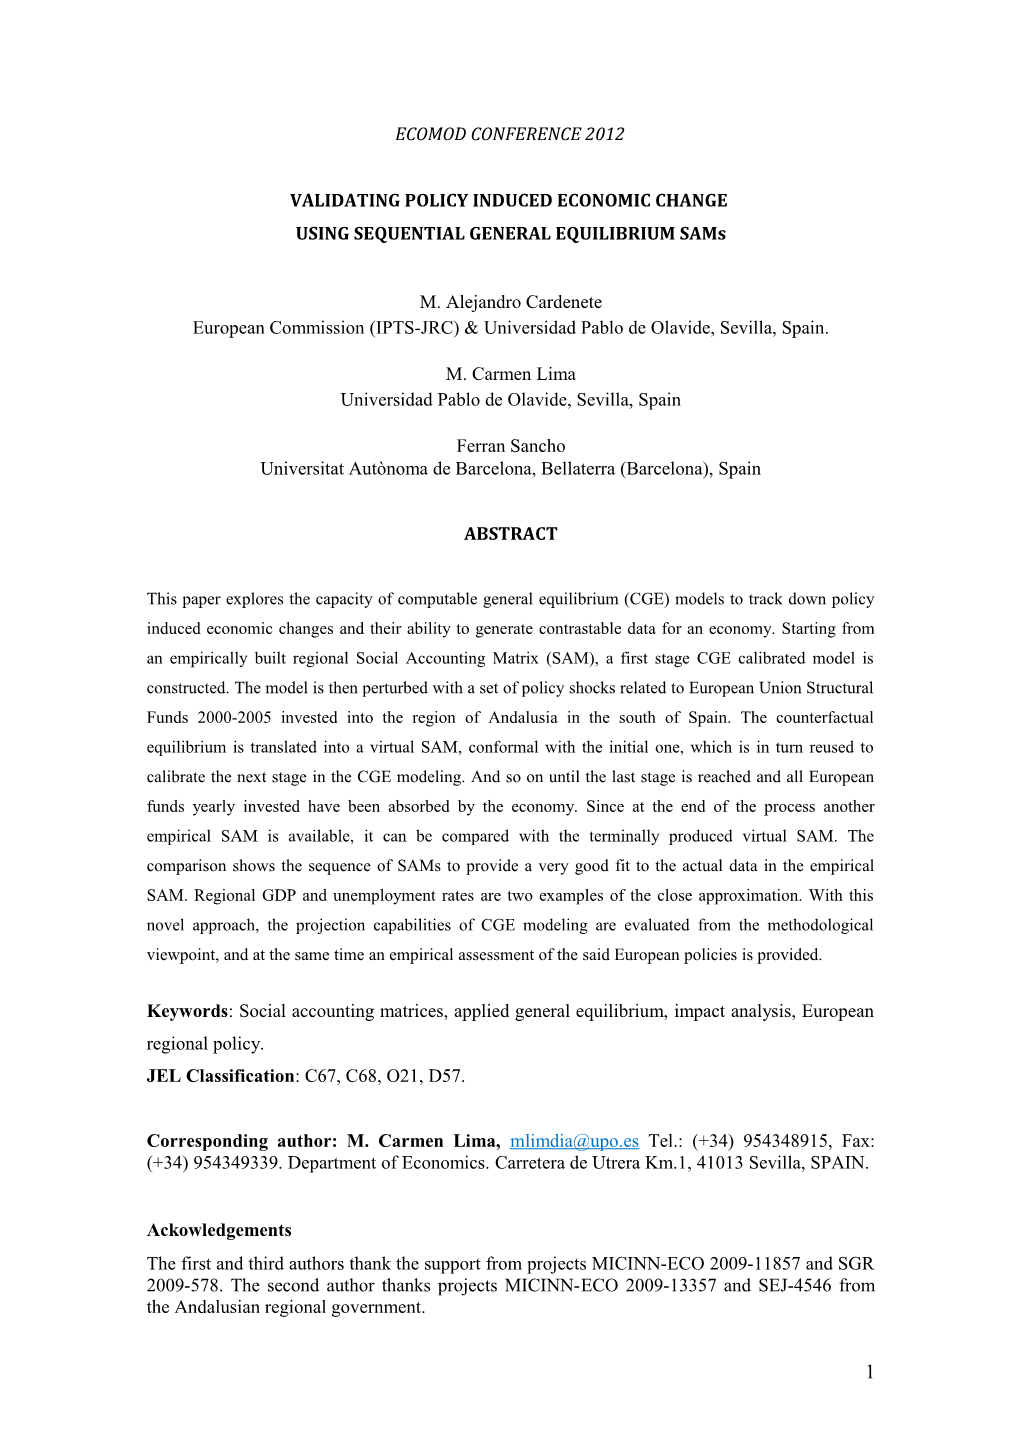 EVALUATING POLICY INDUCED ECONOMIC CHANGE USING SEQUENTIAL GENERAL EQUILIBRIUM Sams: A